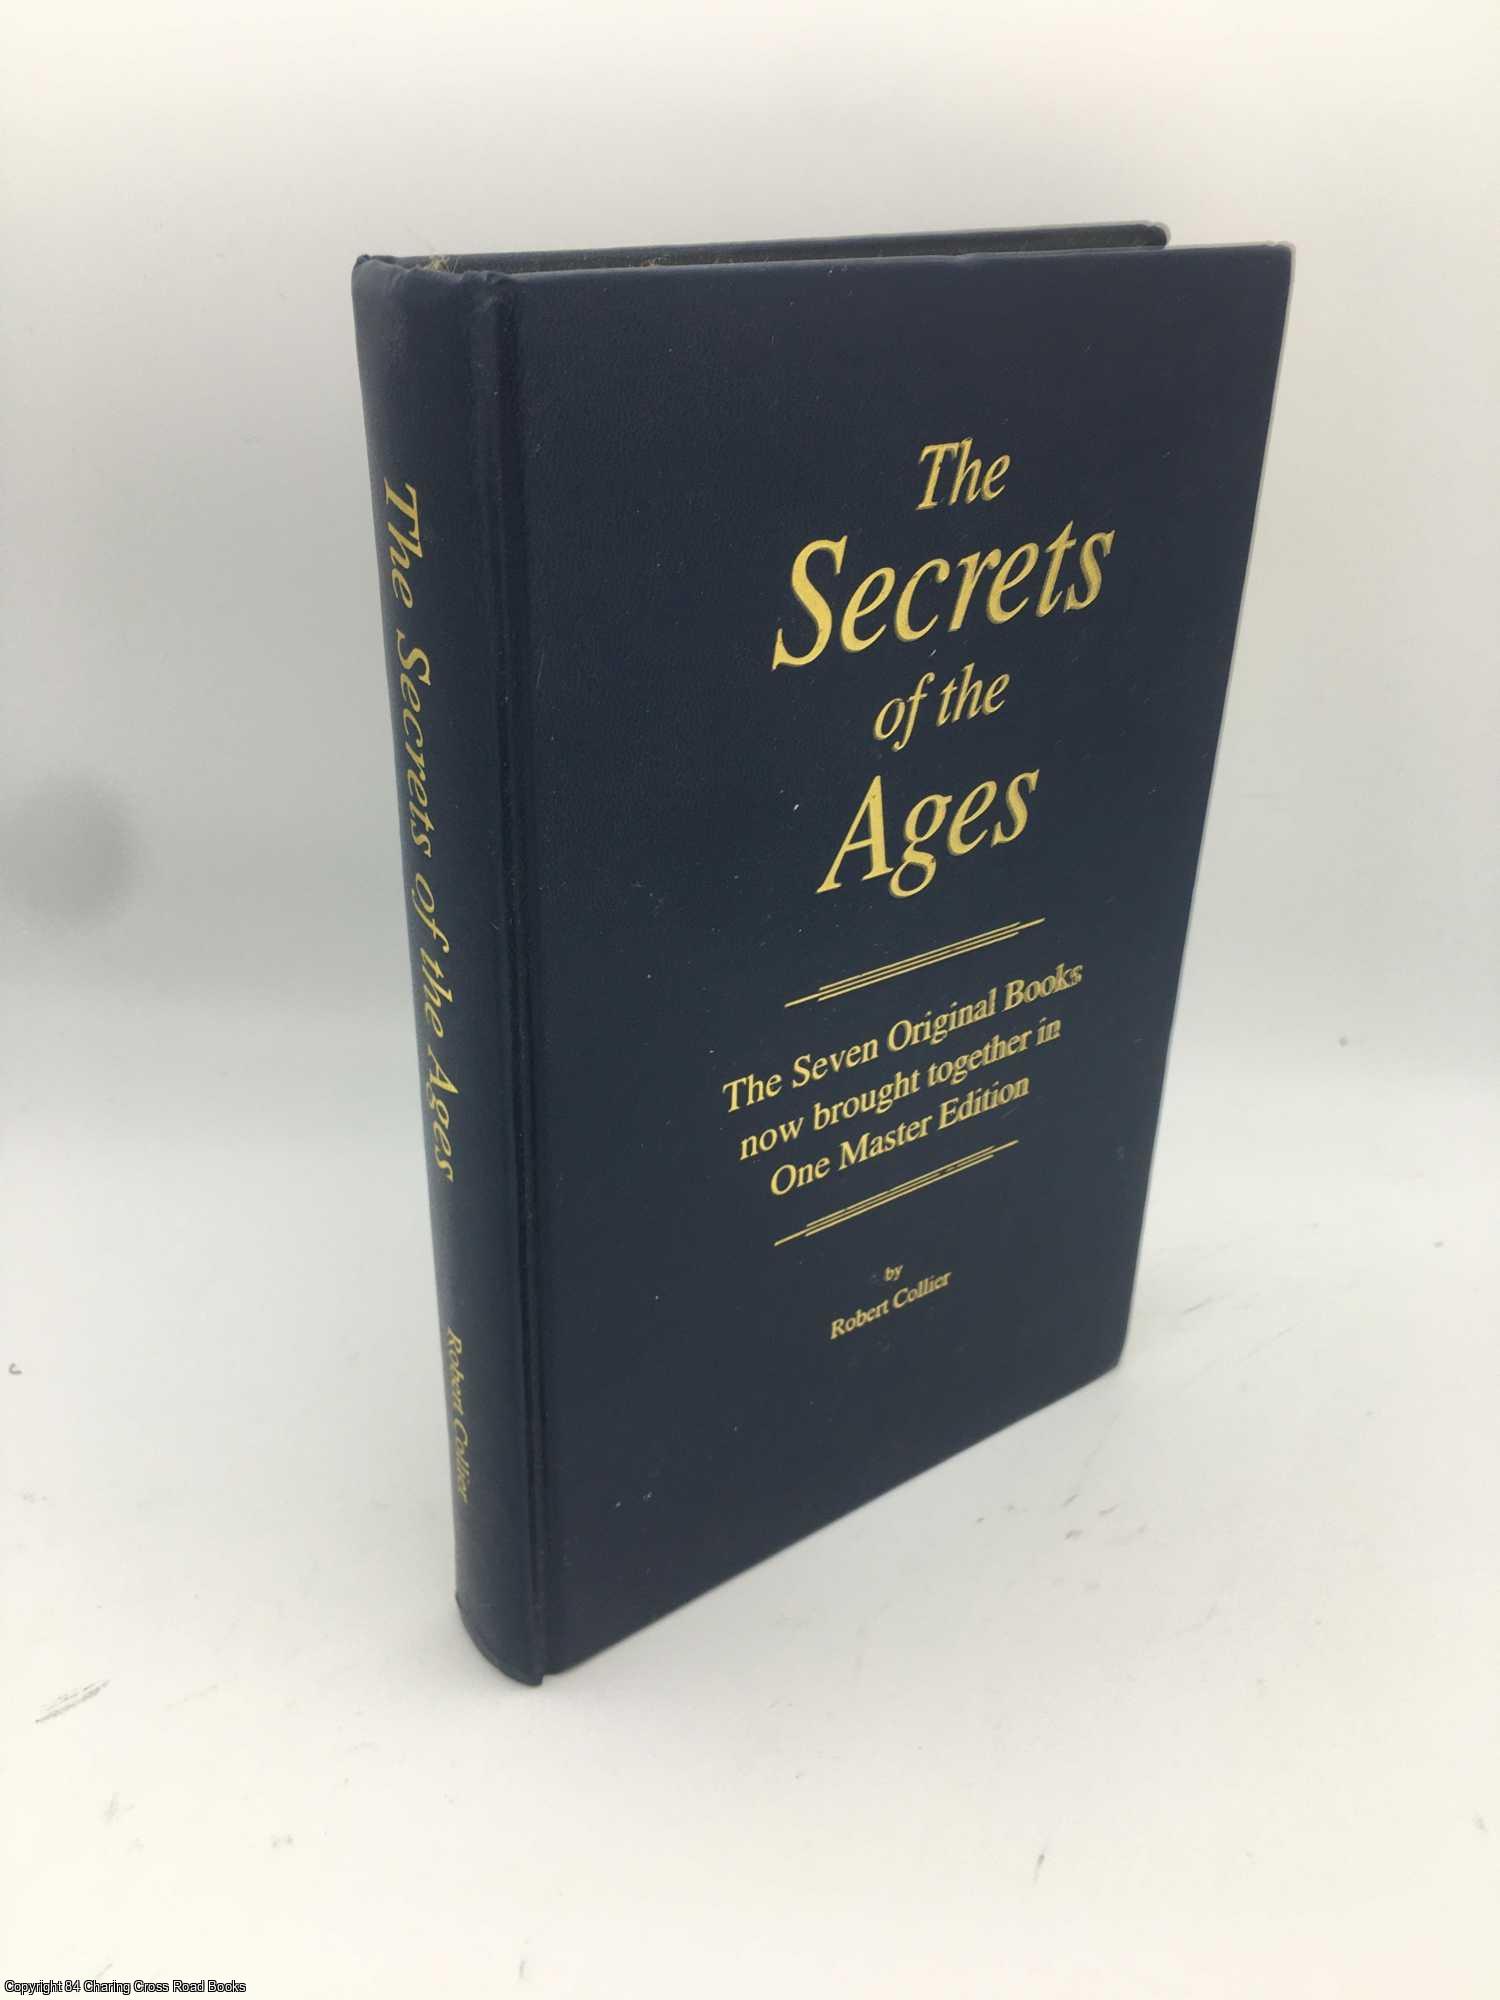 Collier, Robert - The Secrets of the Ages: The Seven Original Books Now Brought Together in One Master Edition